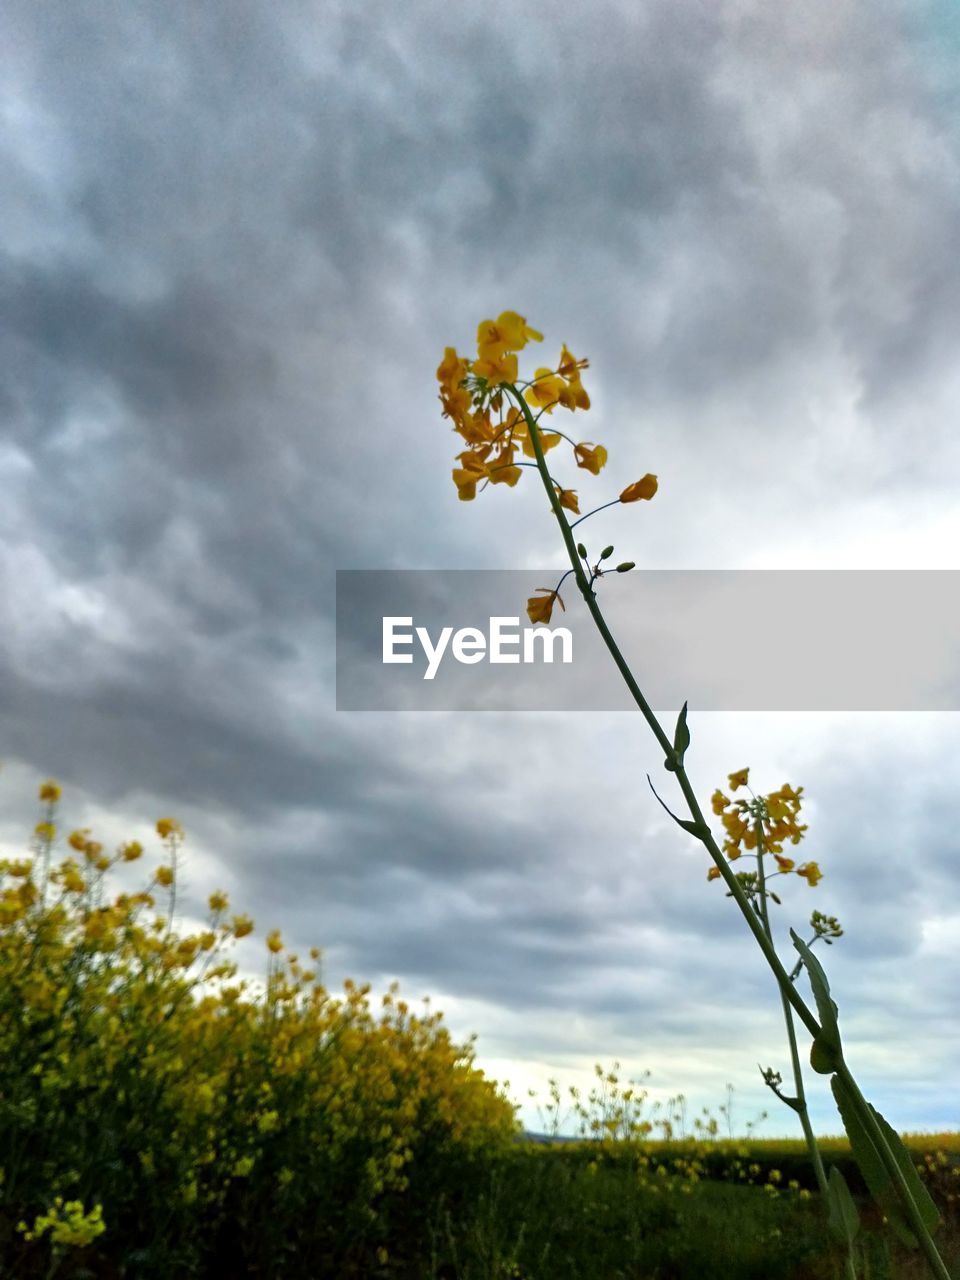 LOW ANGLE VIEW OF FLOWERING PLANT AGAINST CLOUDY SKY